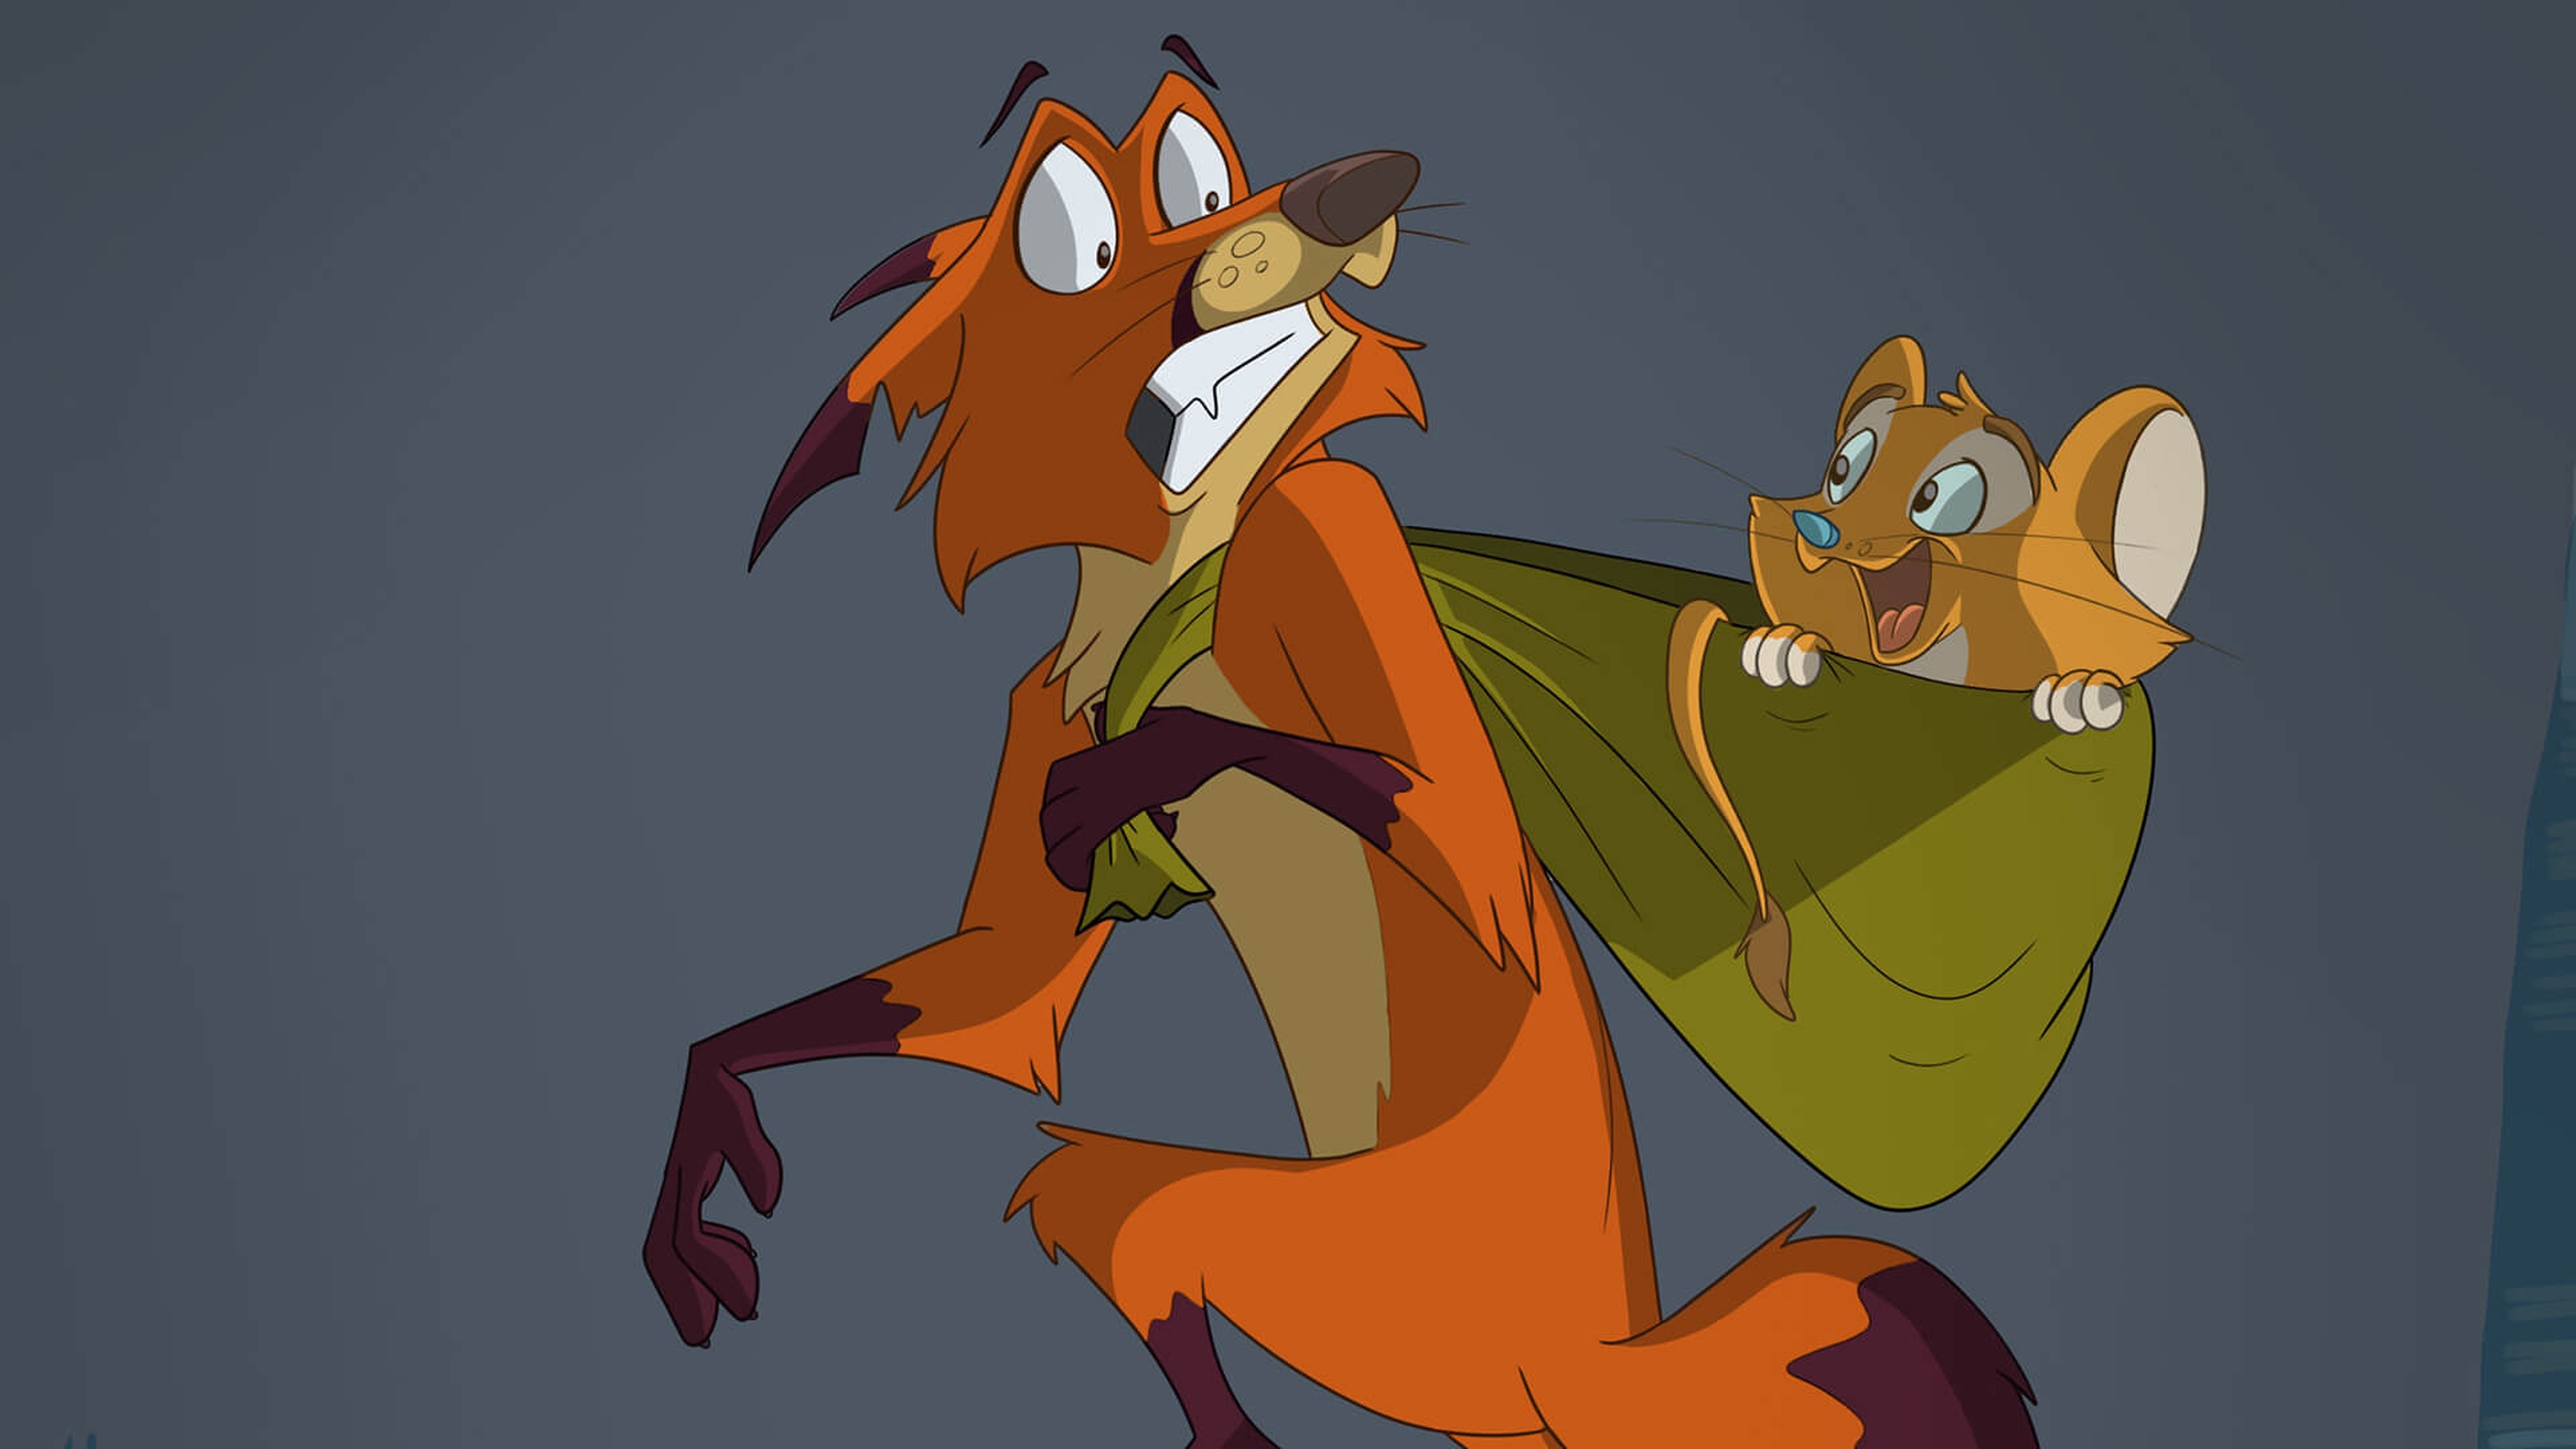 A cartoon fox holding a green backpack with a mouse inside